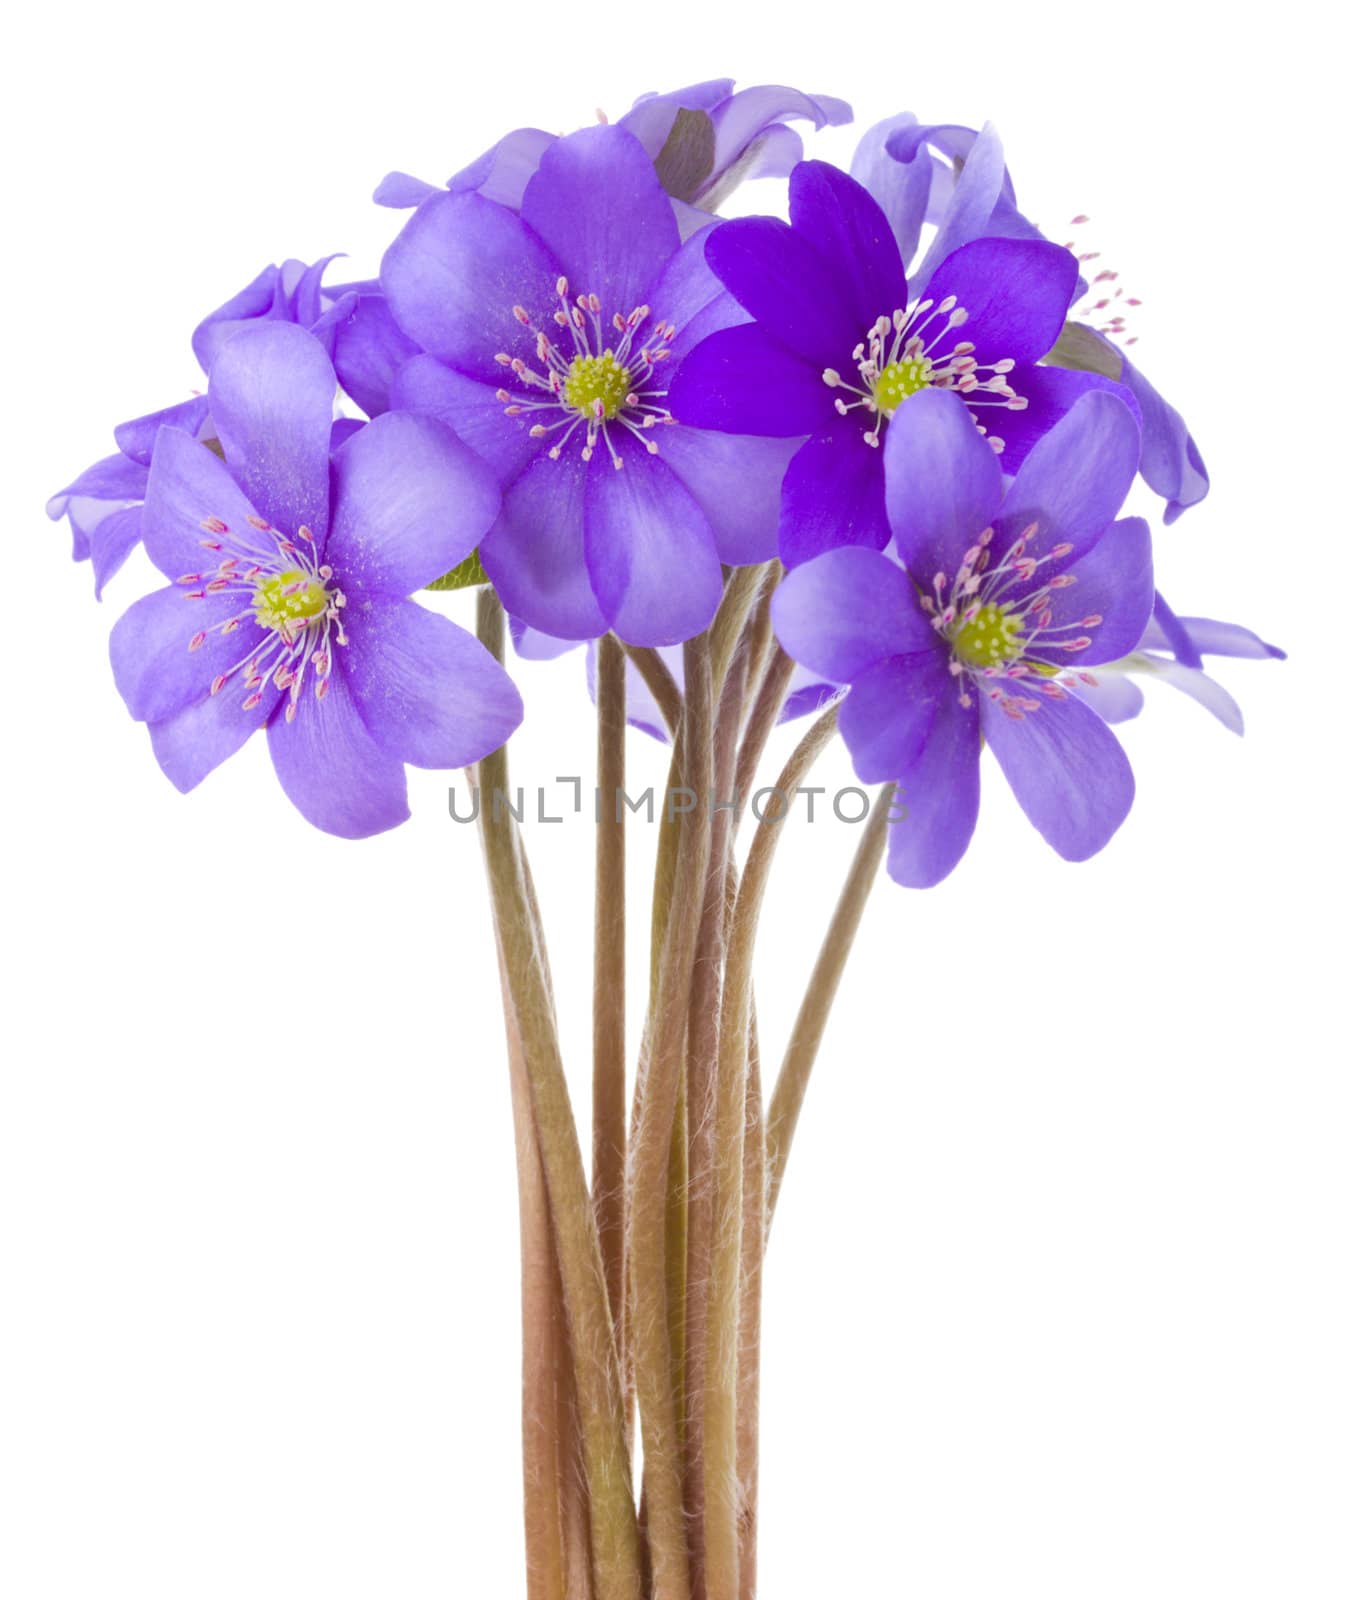 close-up hepatica flowers, isolated on white